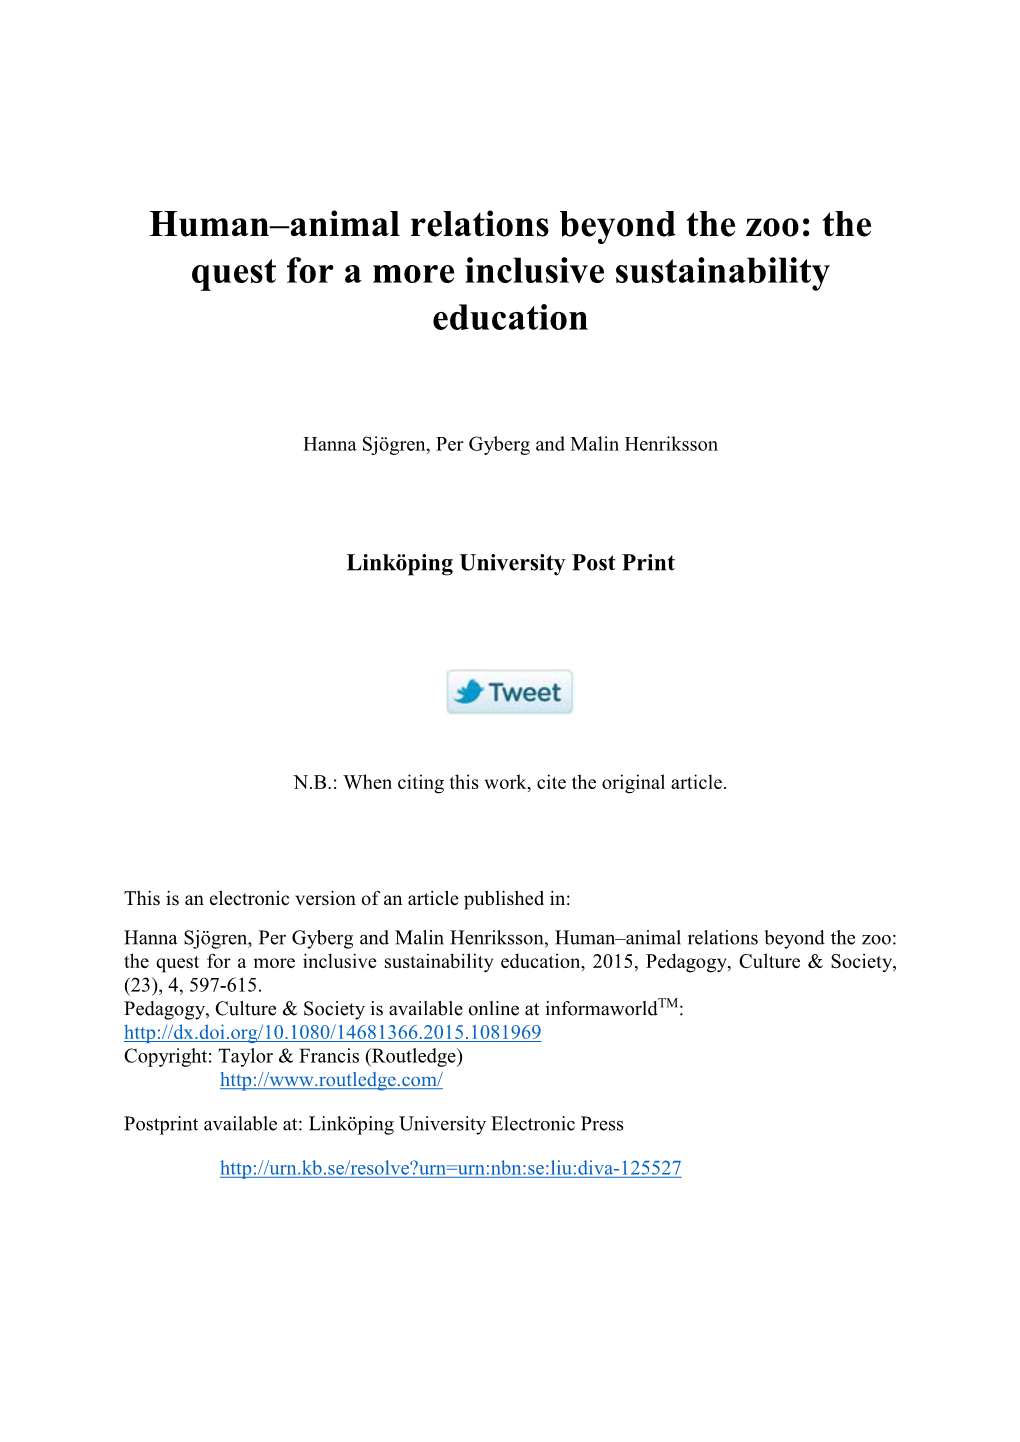 Human–Animal Relations Beyond the Zoo: the Quest for a More Inclusive Sustainability Education